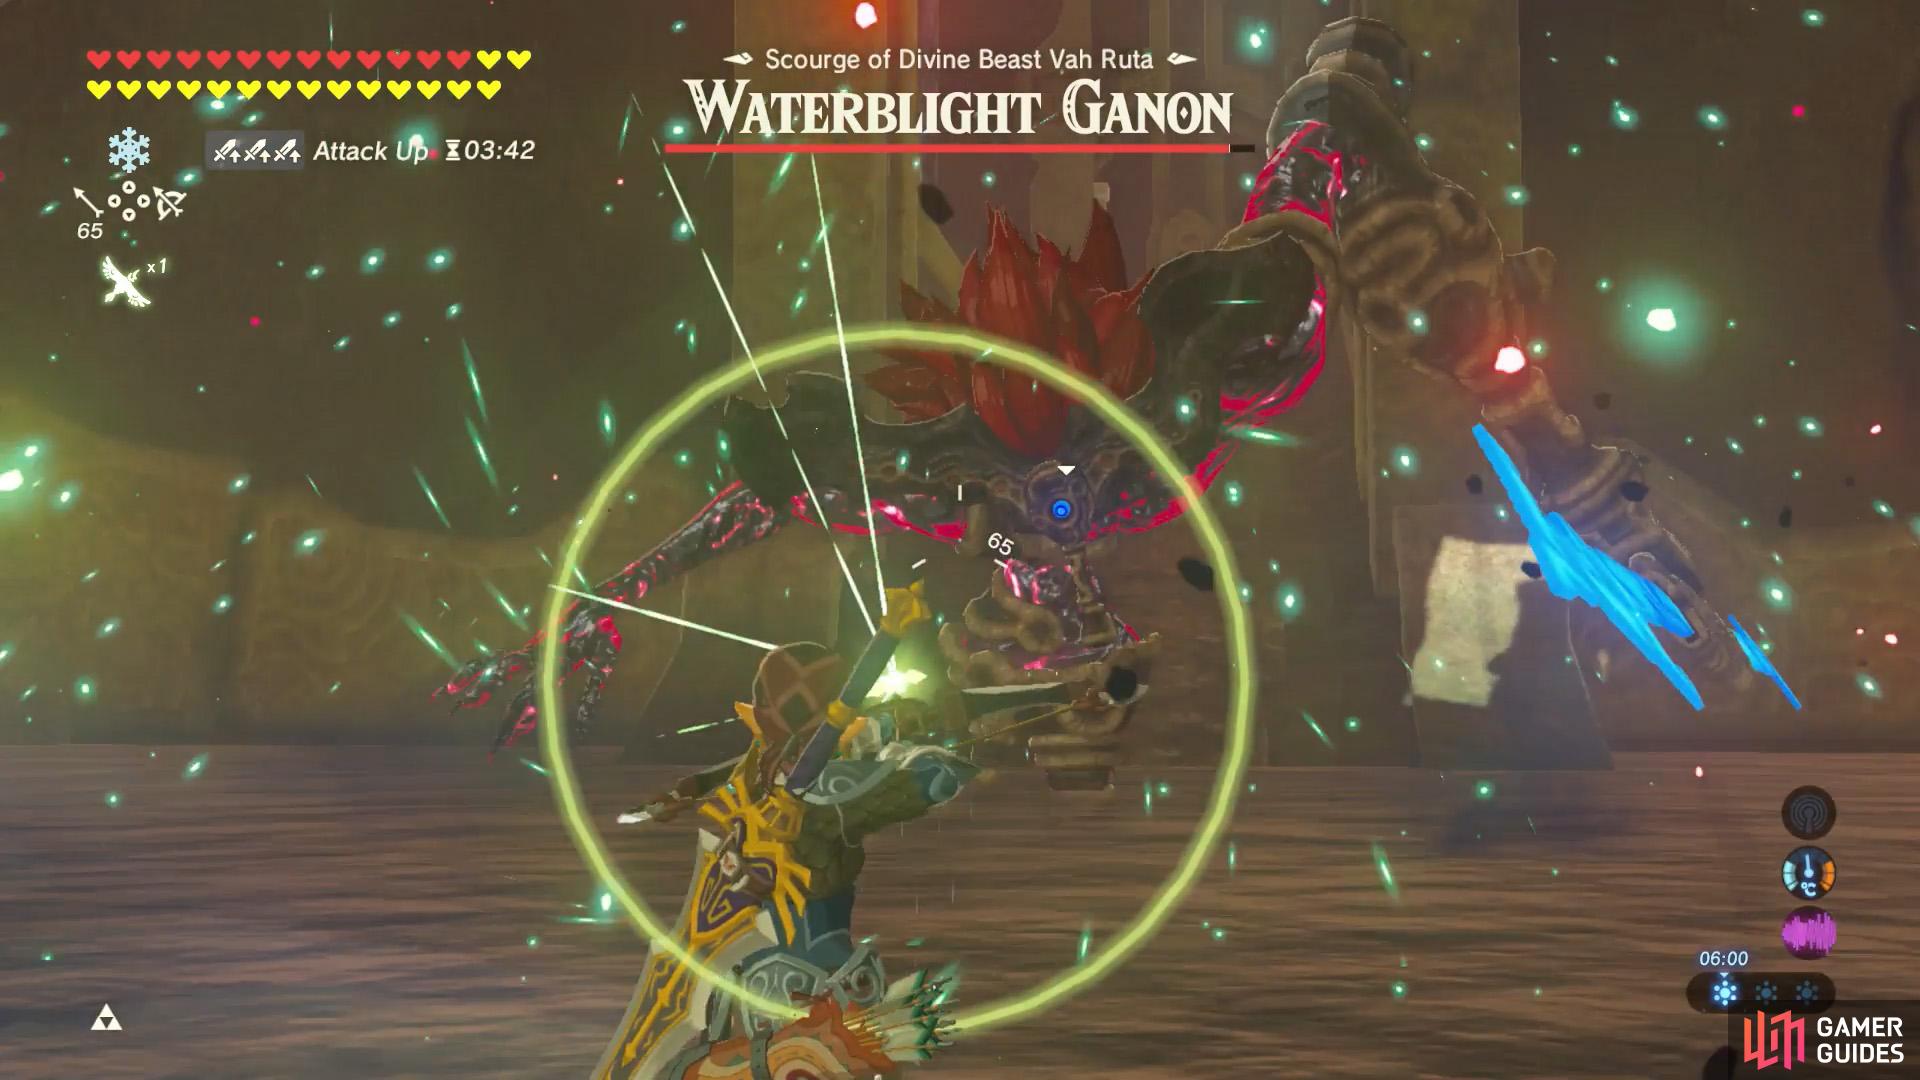 Waterblight Ganon fights with a humongous lance. We suggest attacking from afar.